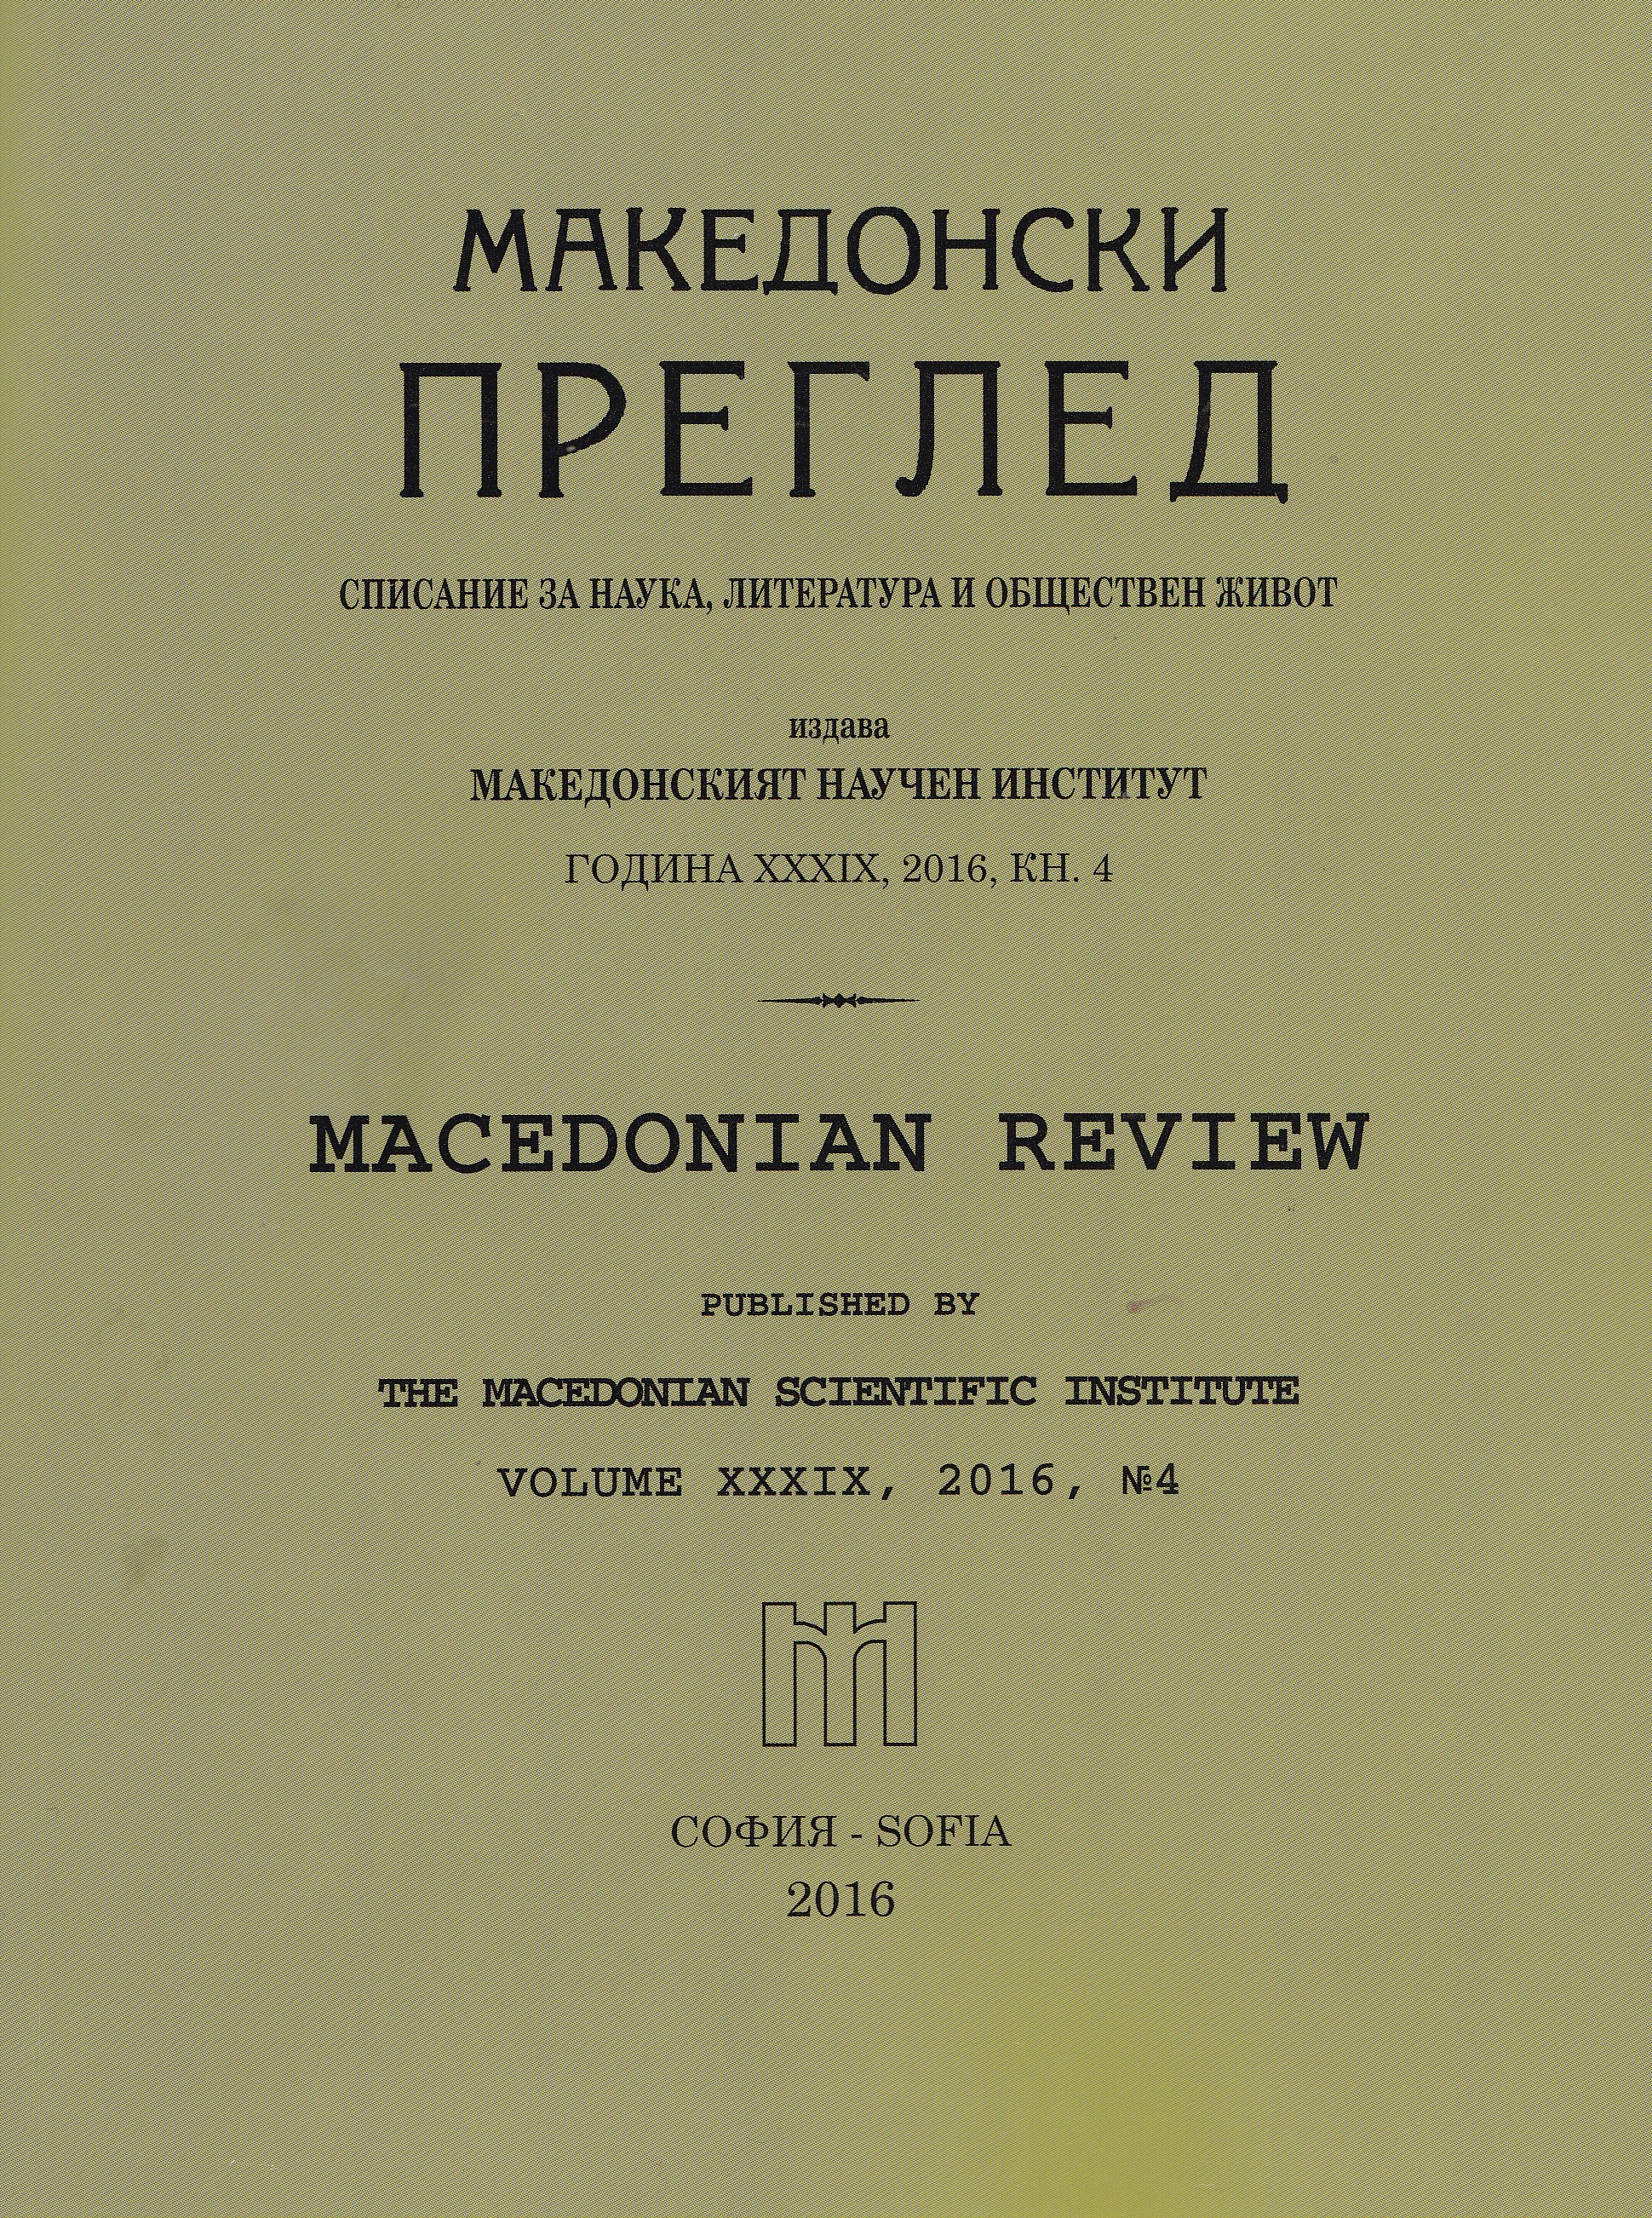 Bulgarian patriarchate and church problem in the Republic of Macedonia — meetings and talking at cross-purposes after 1989 Cover Image